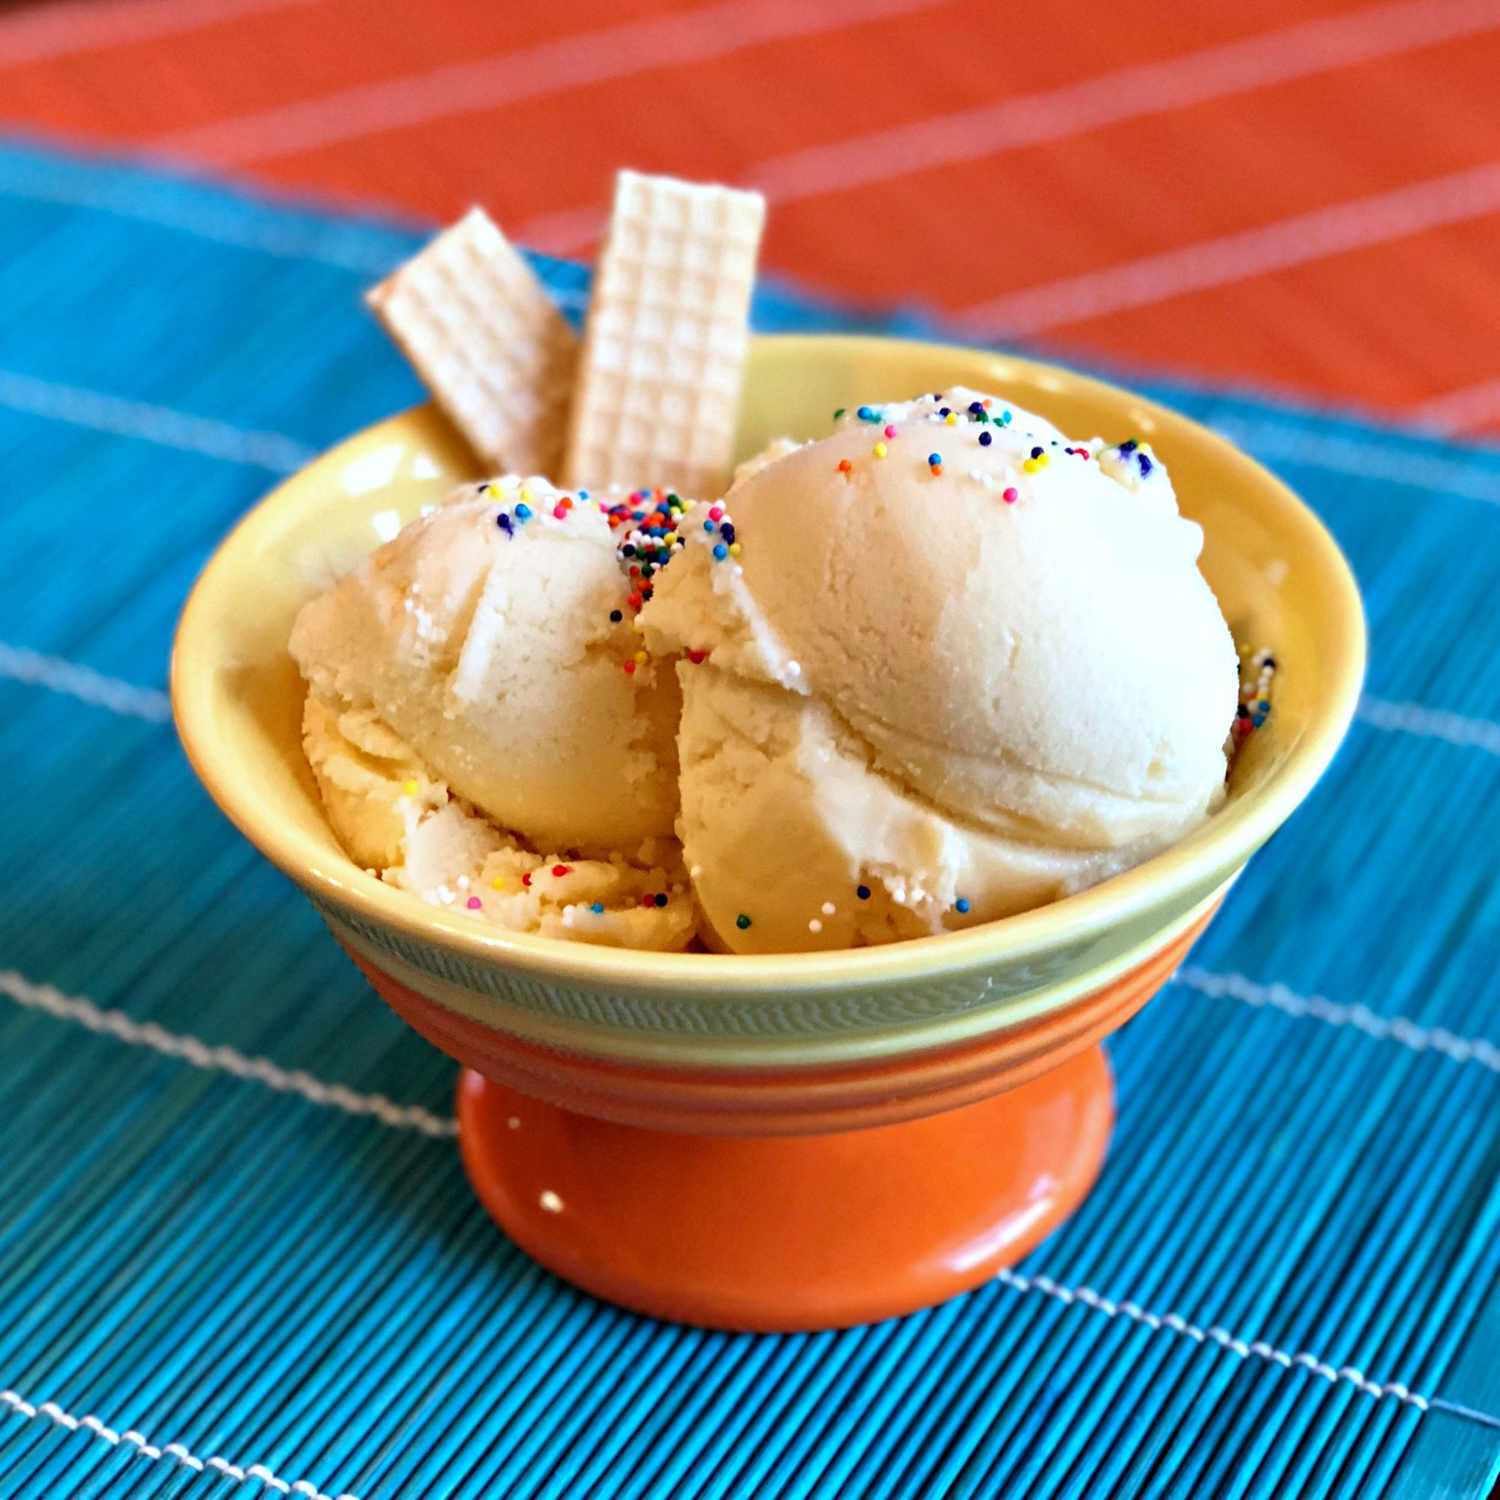 a bowl of vanilla ice cream with sprinkles and wafers